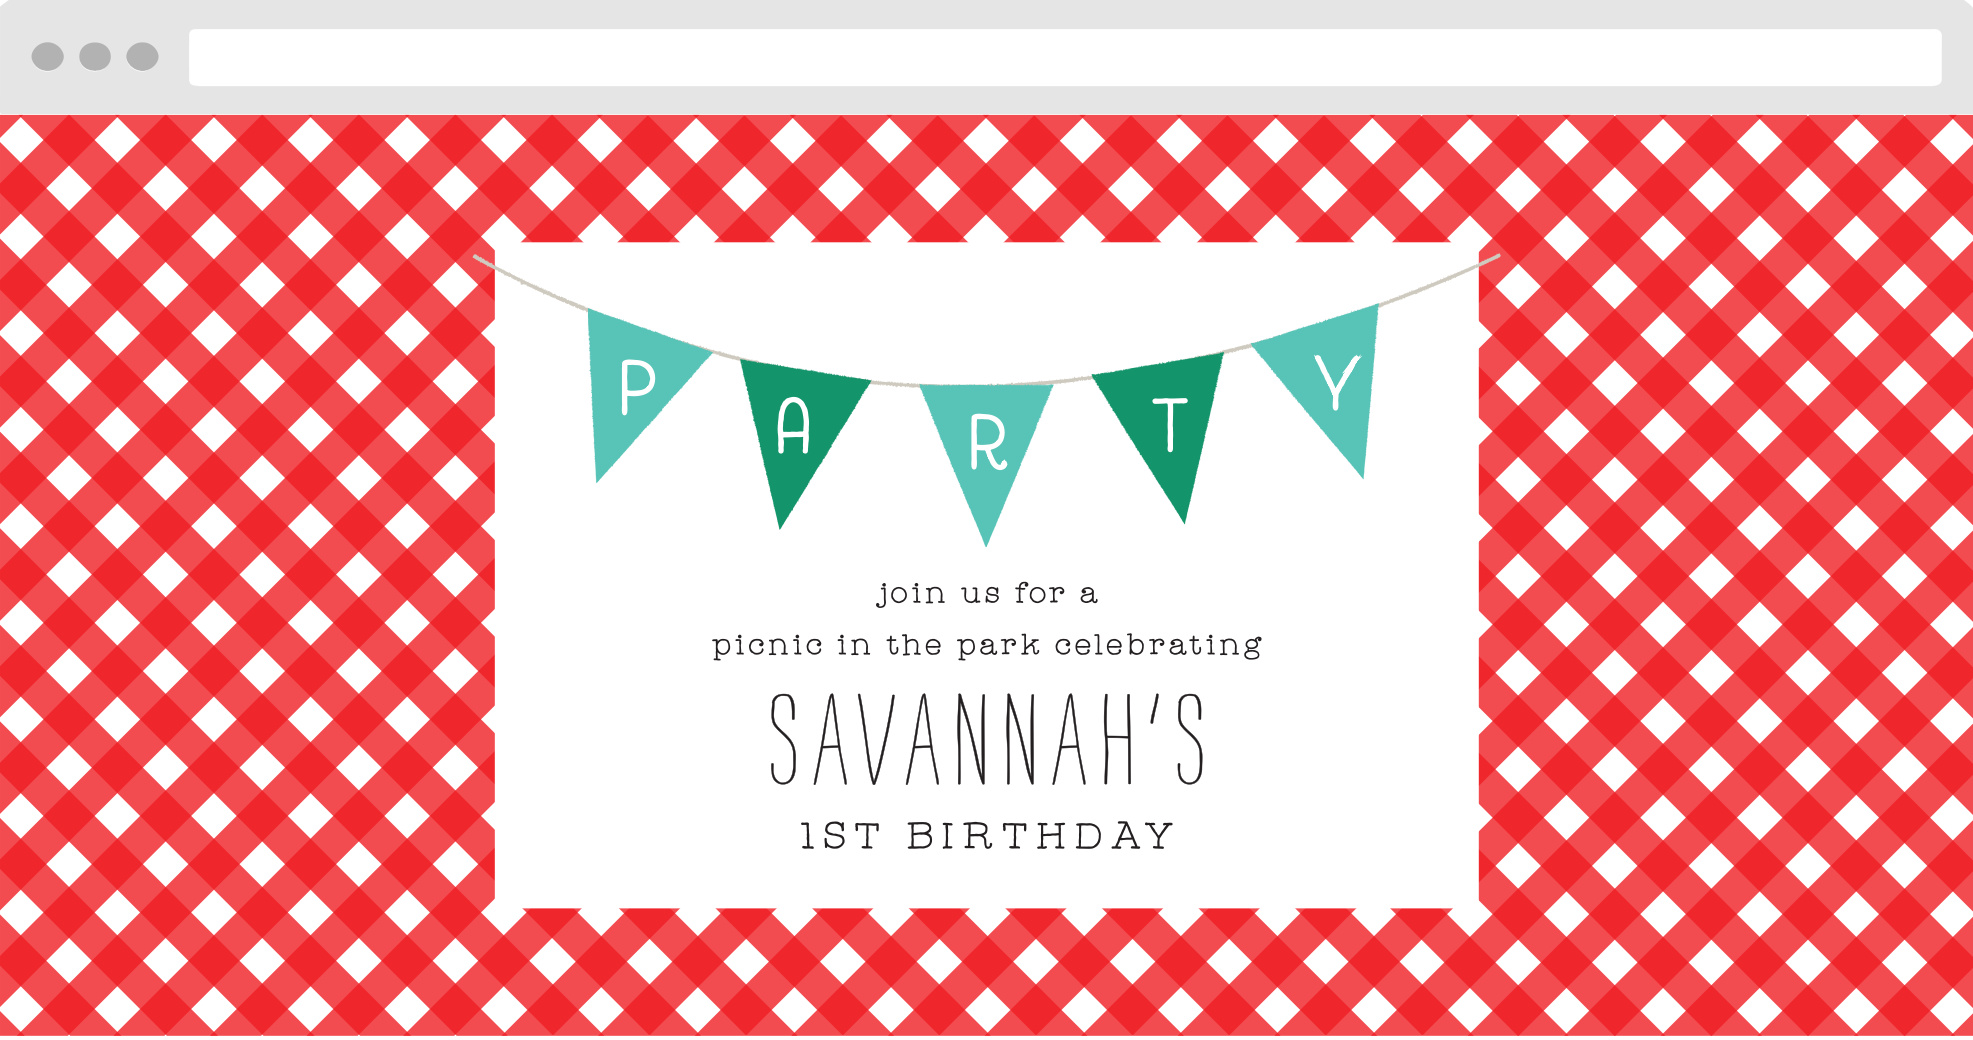 100% Free Birthday Party Websites  Match Your Colors & Style! - Basic  Invite